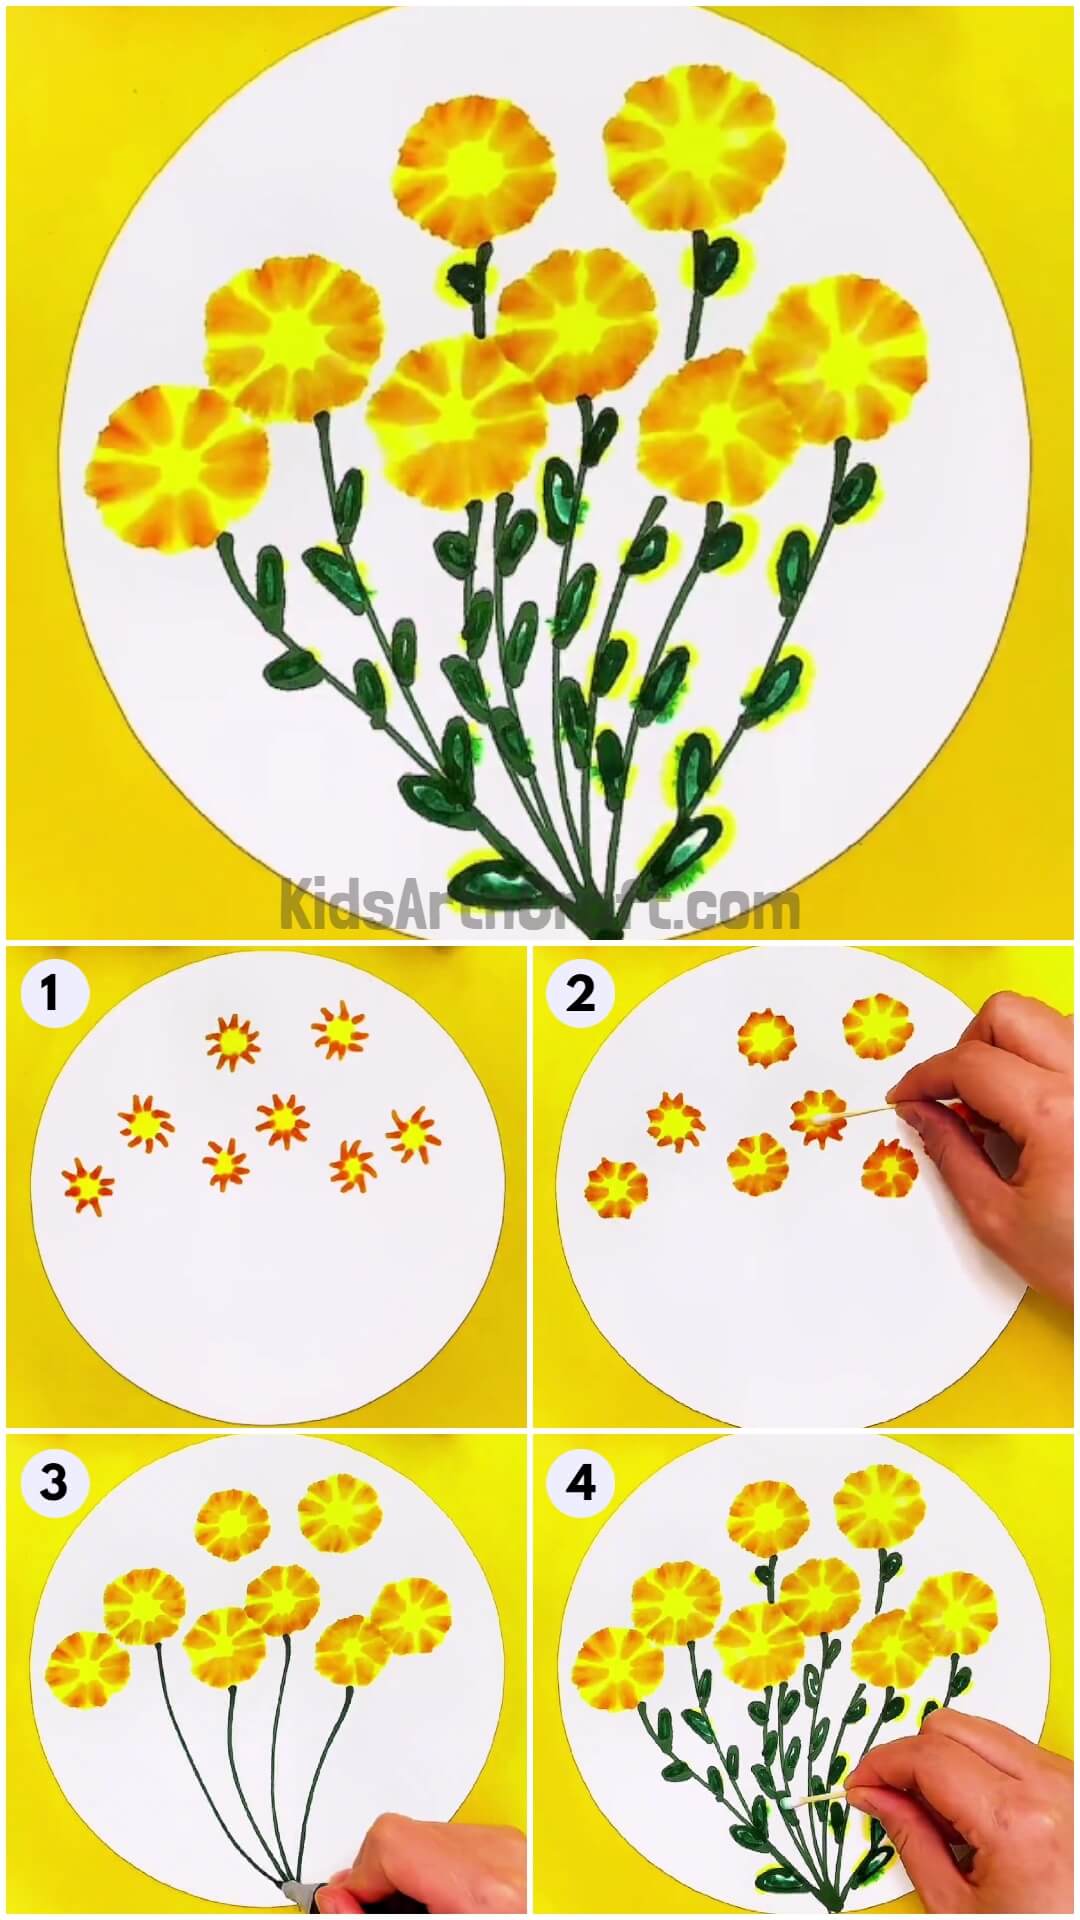 Pretty Flower Artwork Using Sketch Pens And Cotton Earbuds